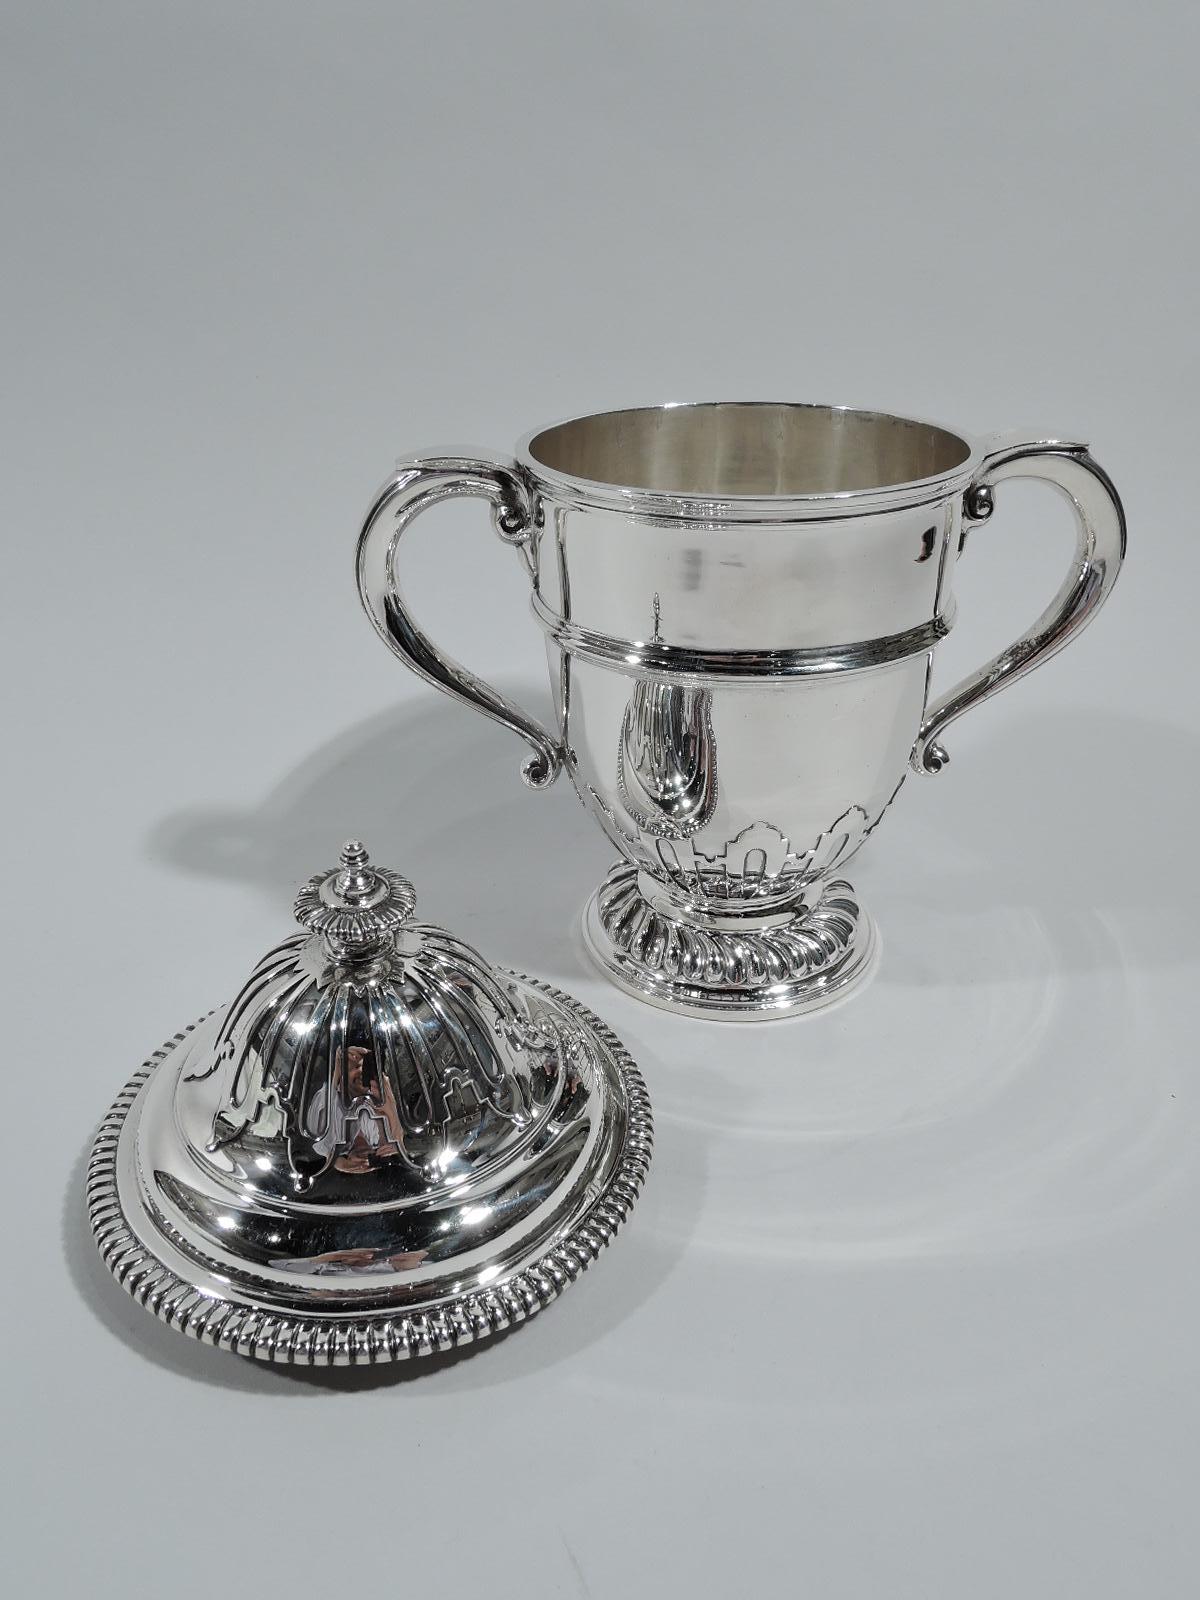 George V sterling silver covered urn. Made by Charles & Richard Comyns in London in 1925. Girdled urn with capped scroll side handles on raised foot. Cover domed. Applied strapwork. Gadrooning and twisted fluting. Traditional Georgian Classical form